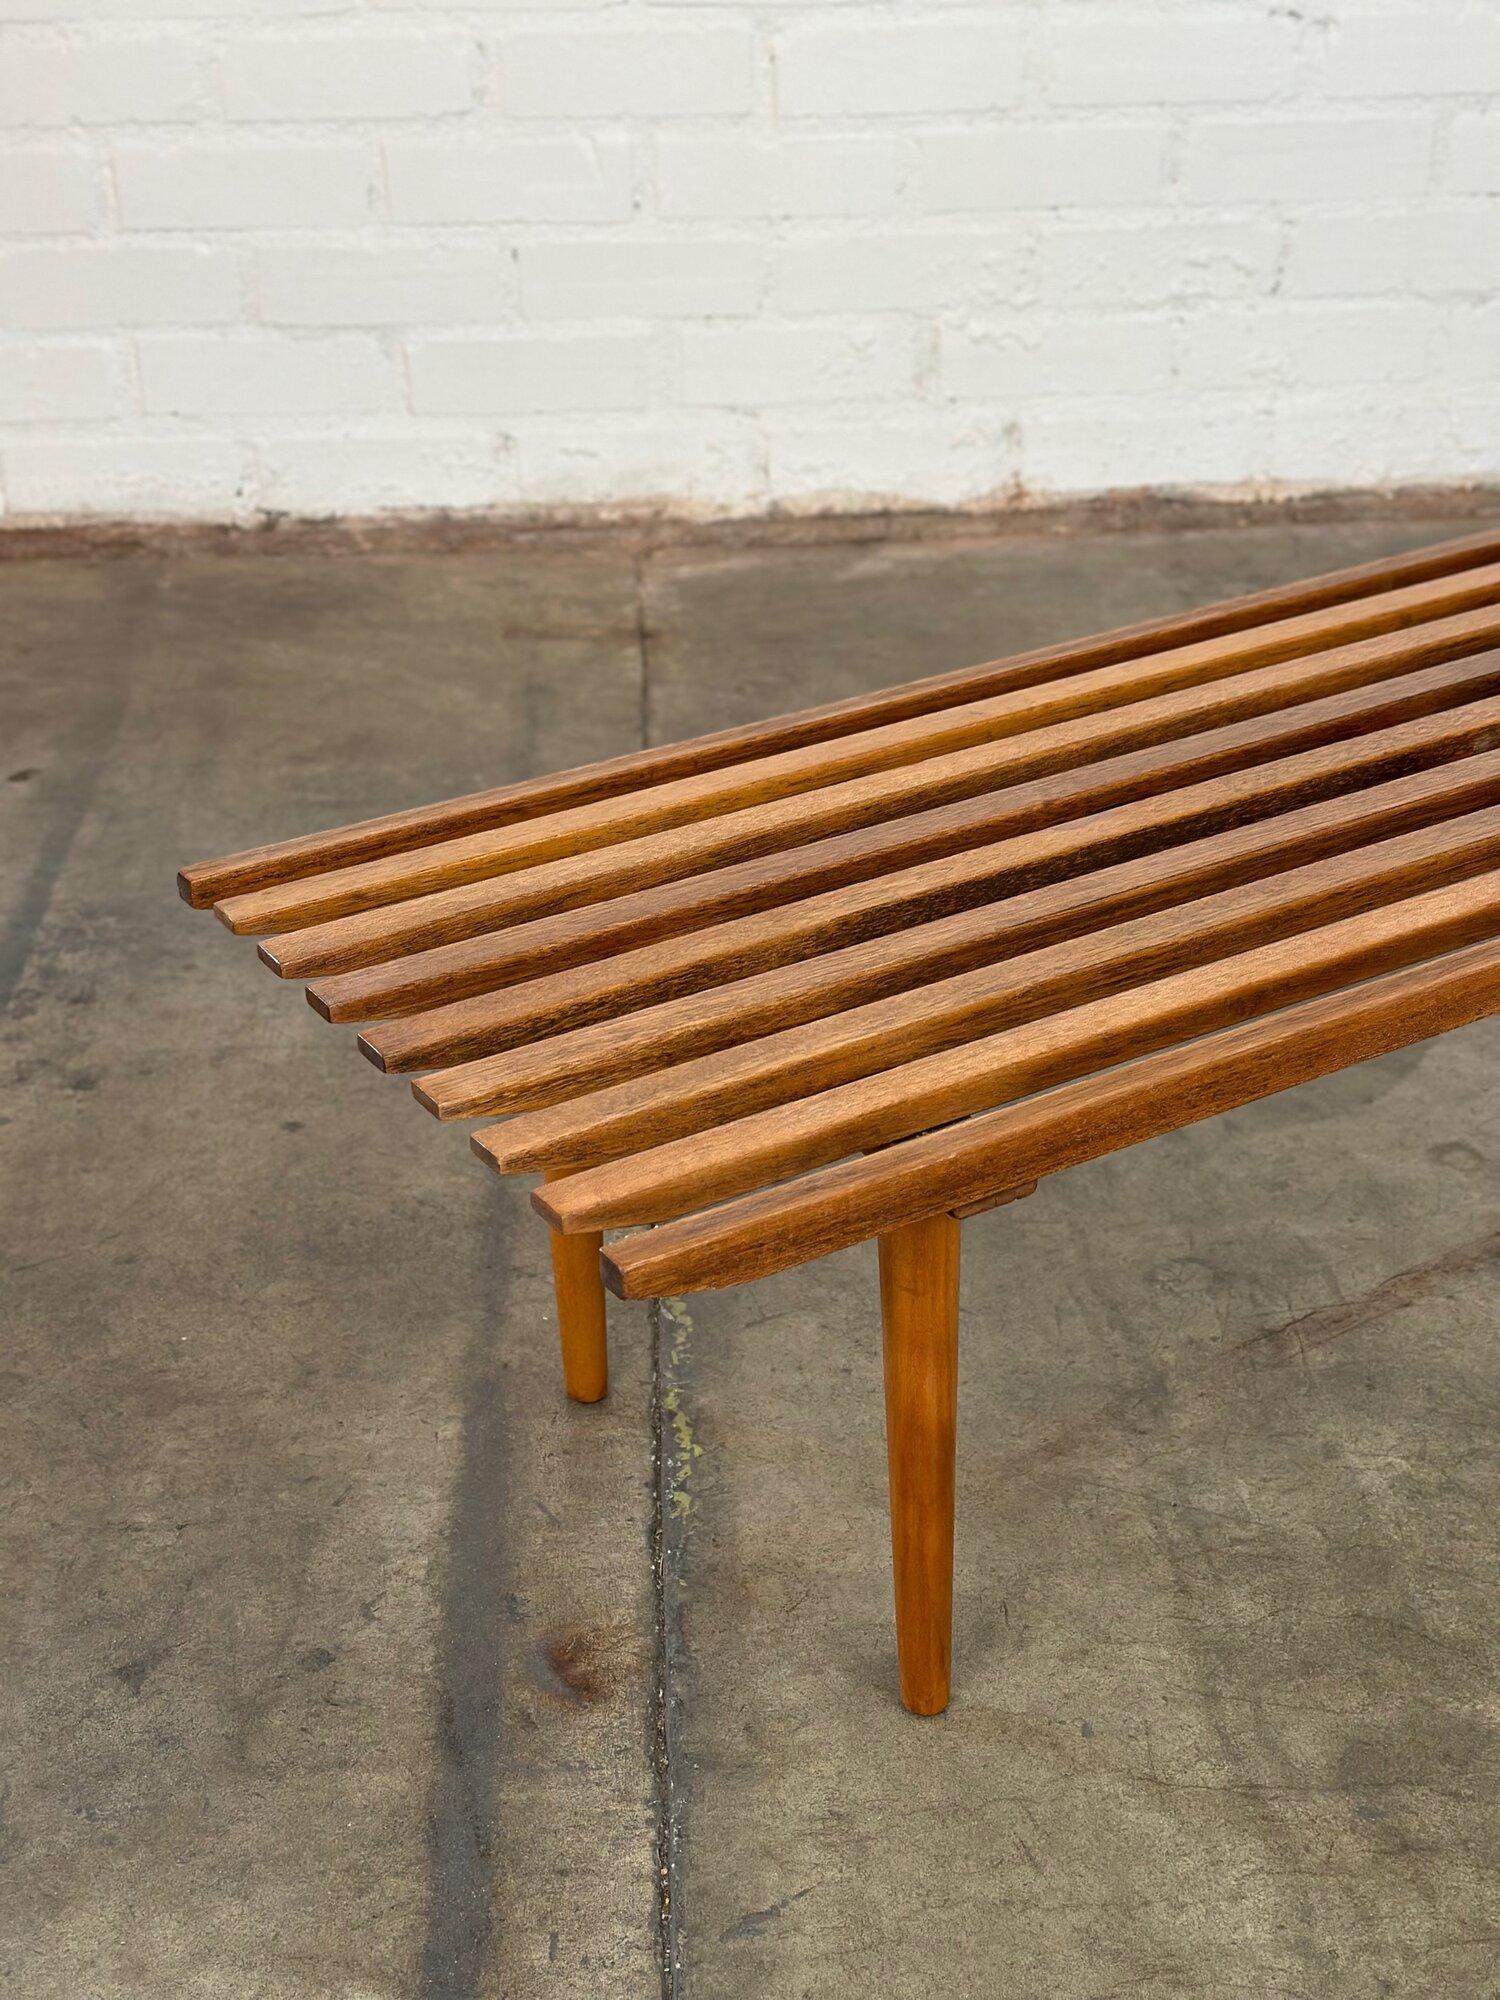 W54 D18 H15

Vintage slat bench refinished and in structurally sound condition. Item shows well with no major areas of wear. Item is vintage, being sold as is, staff has restored to the best of our ability.